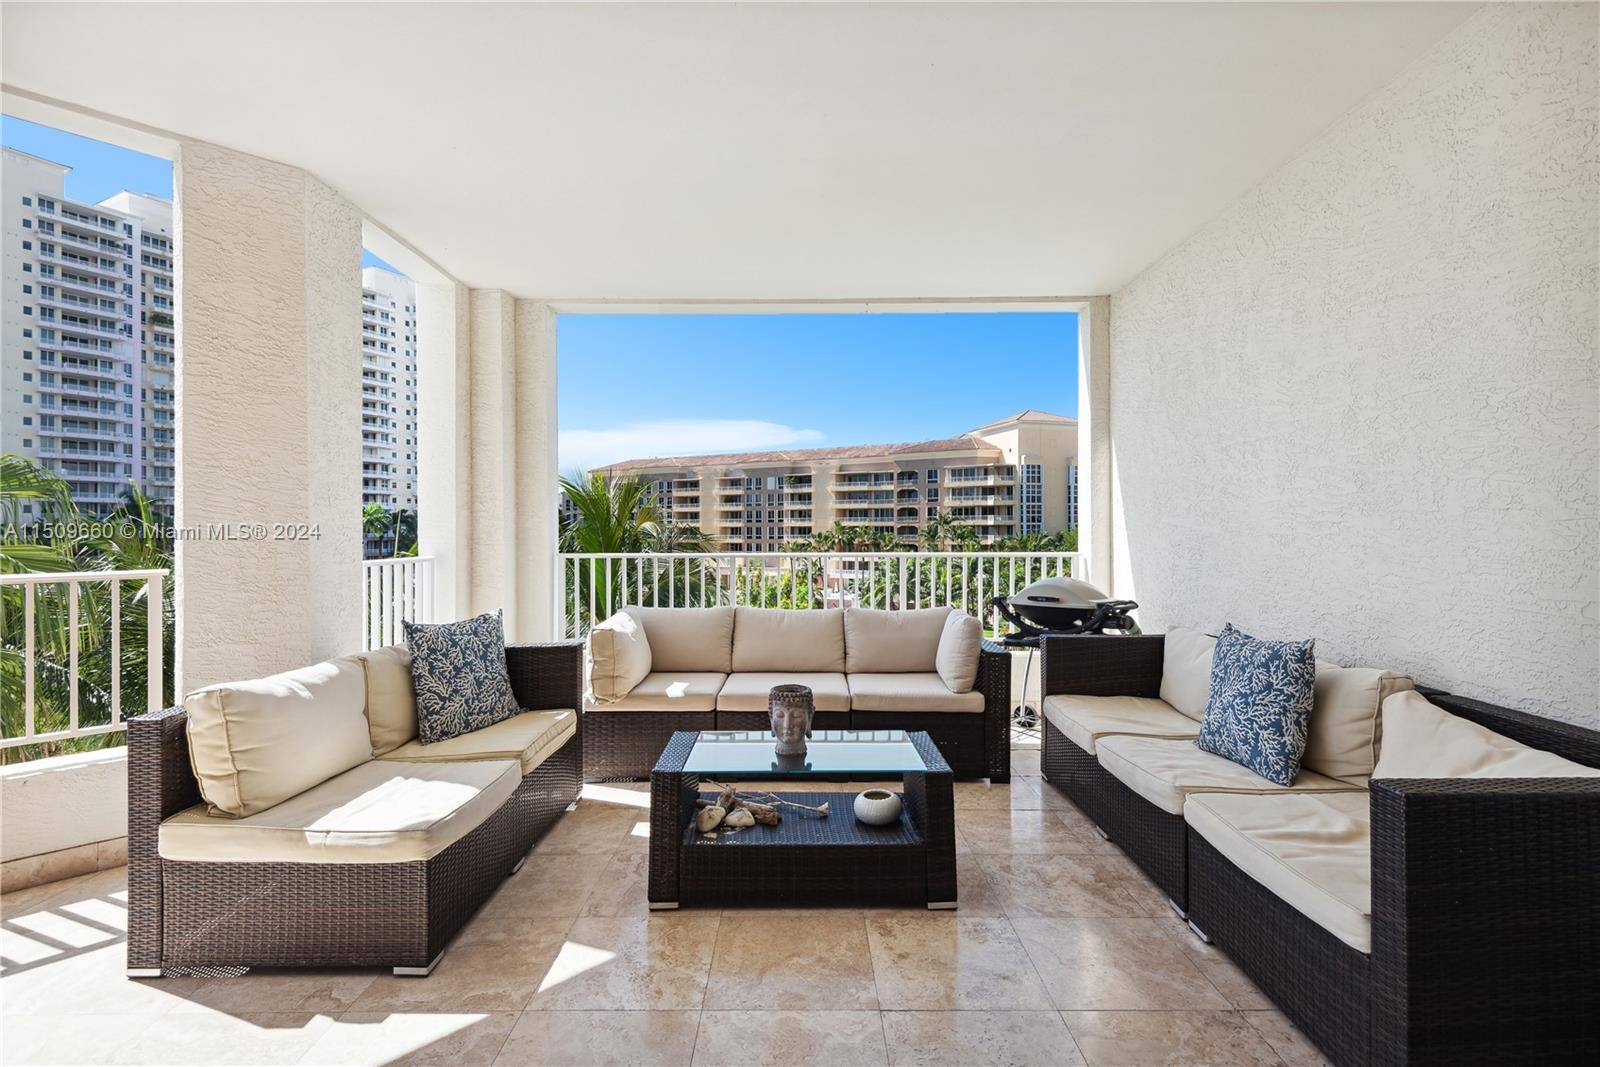 Cozy fully furnished 2 Bedroom 2 Bath apartment, located in Resort Villa II at The Ocean Club in Key Biscayne.